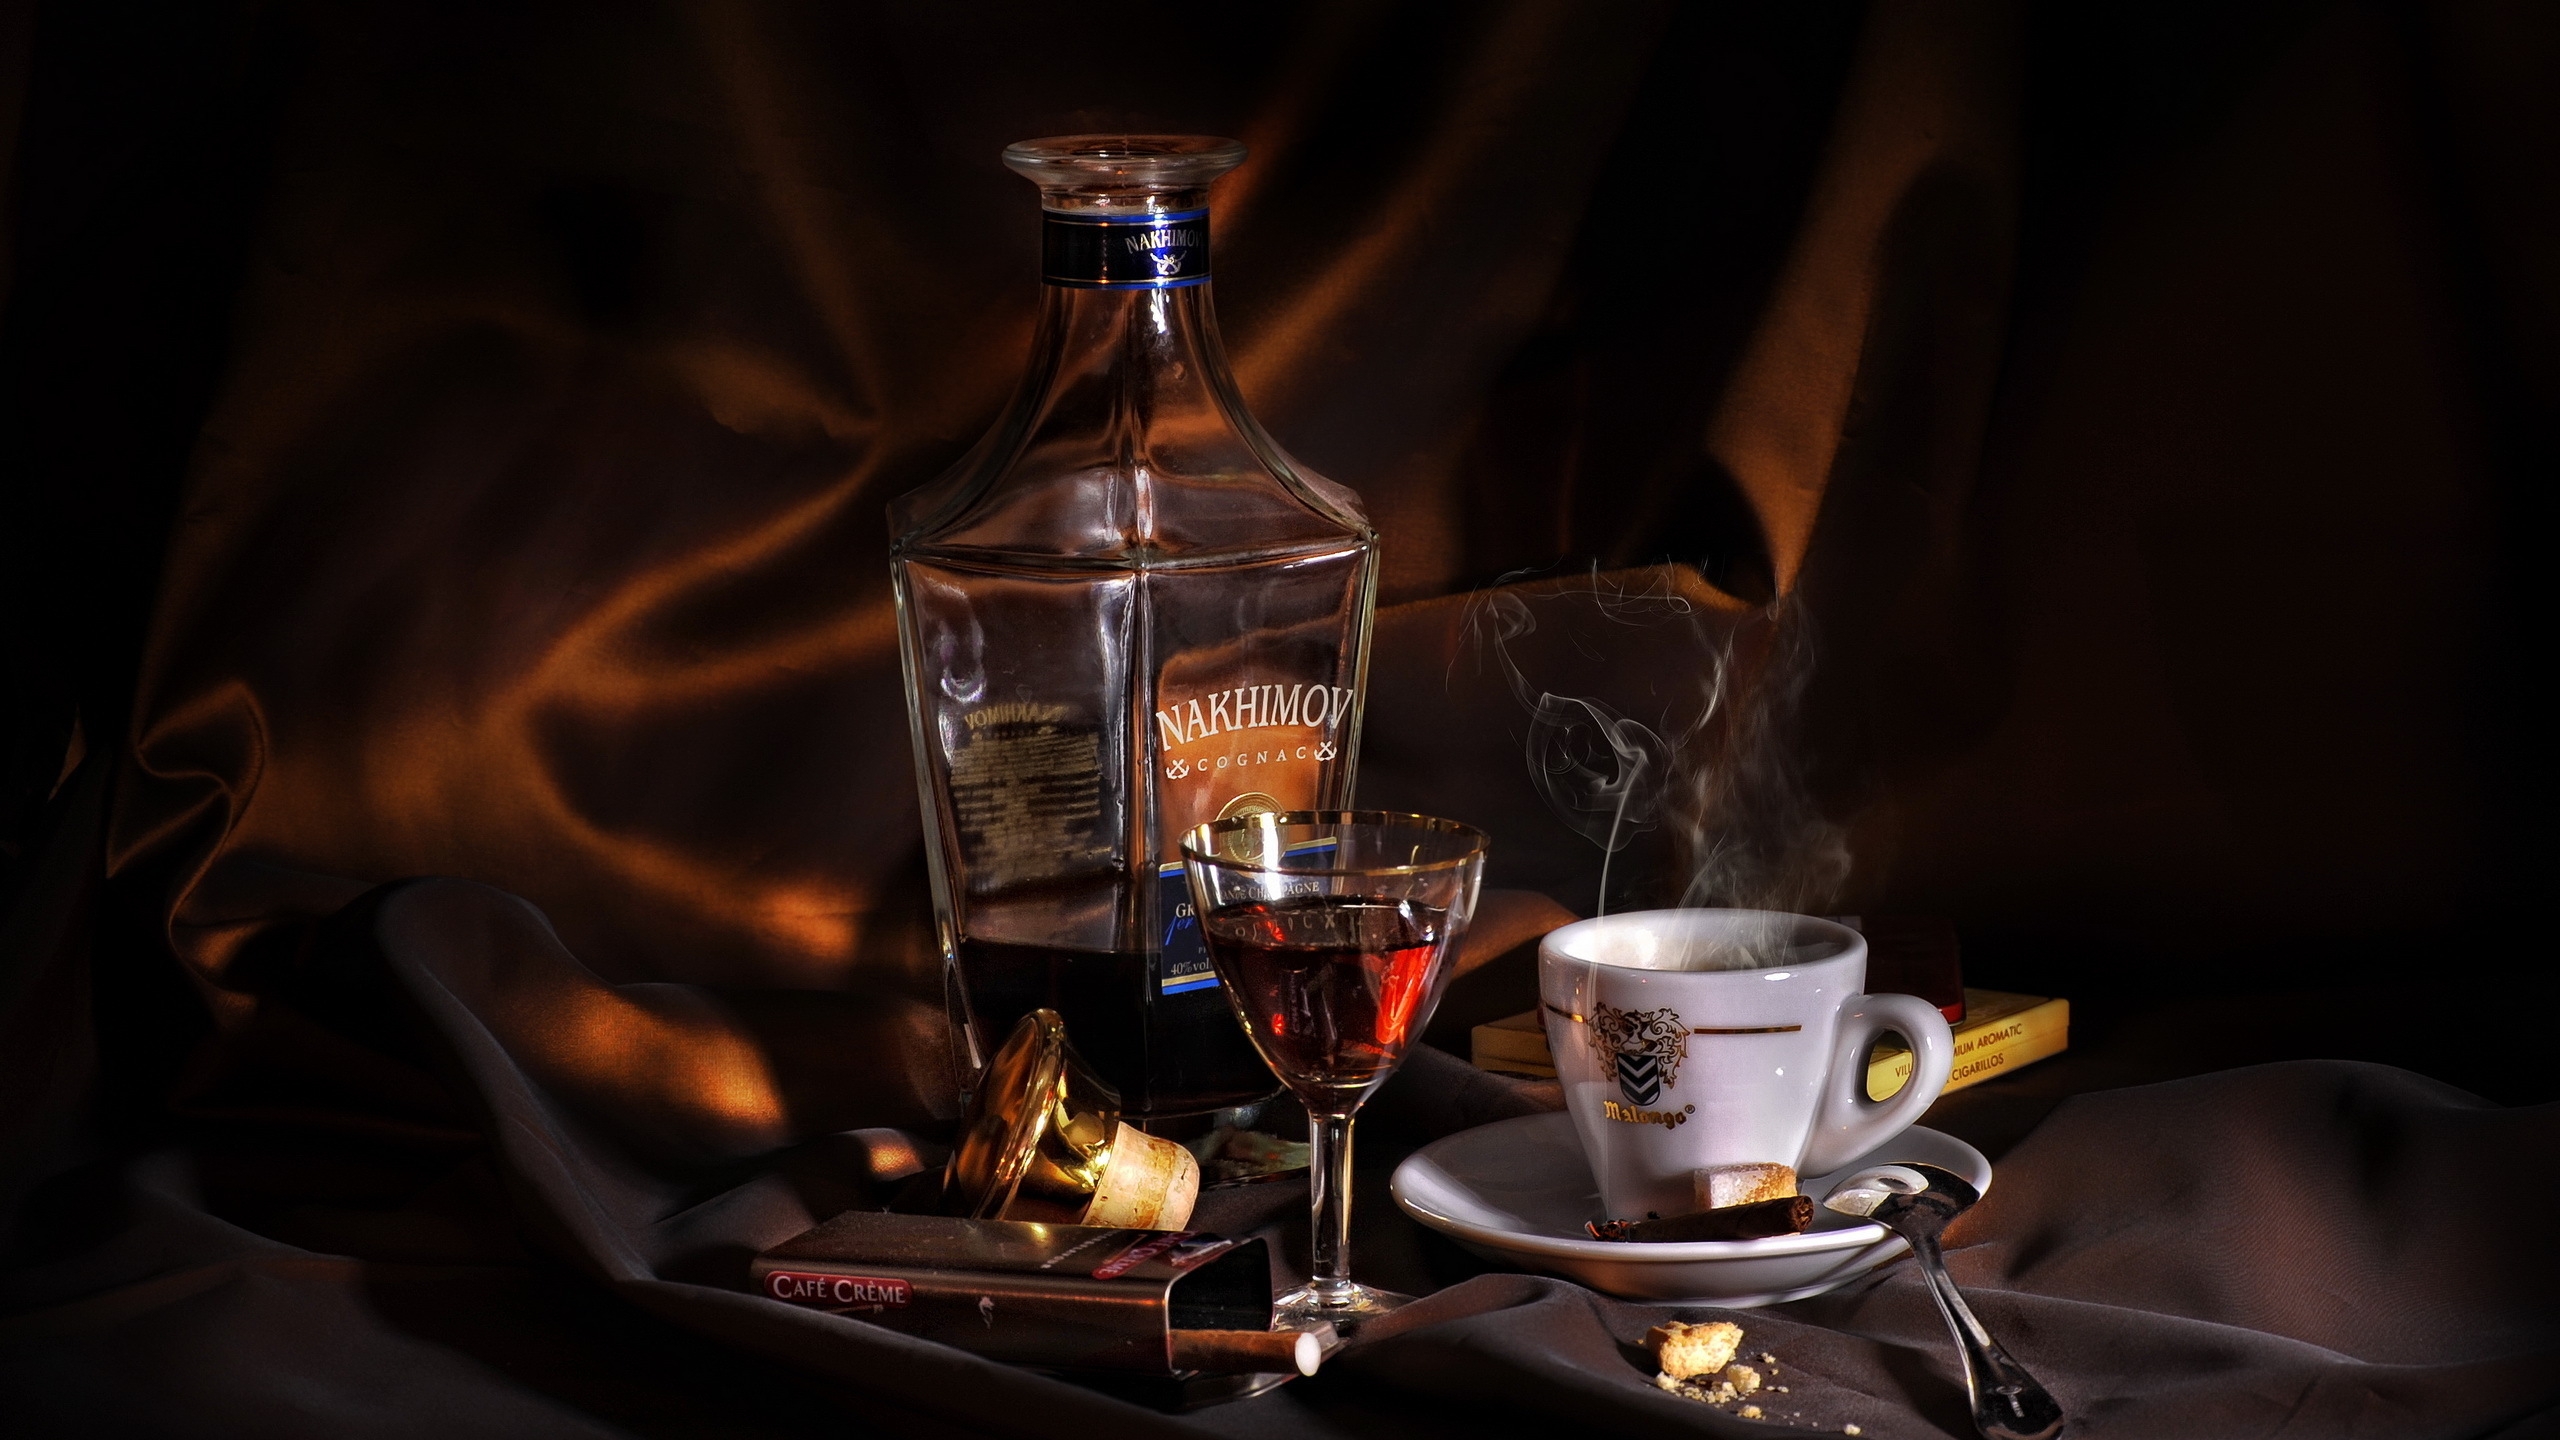 Cognac and Coffe for 2560x1440 HDTV resolution